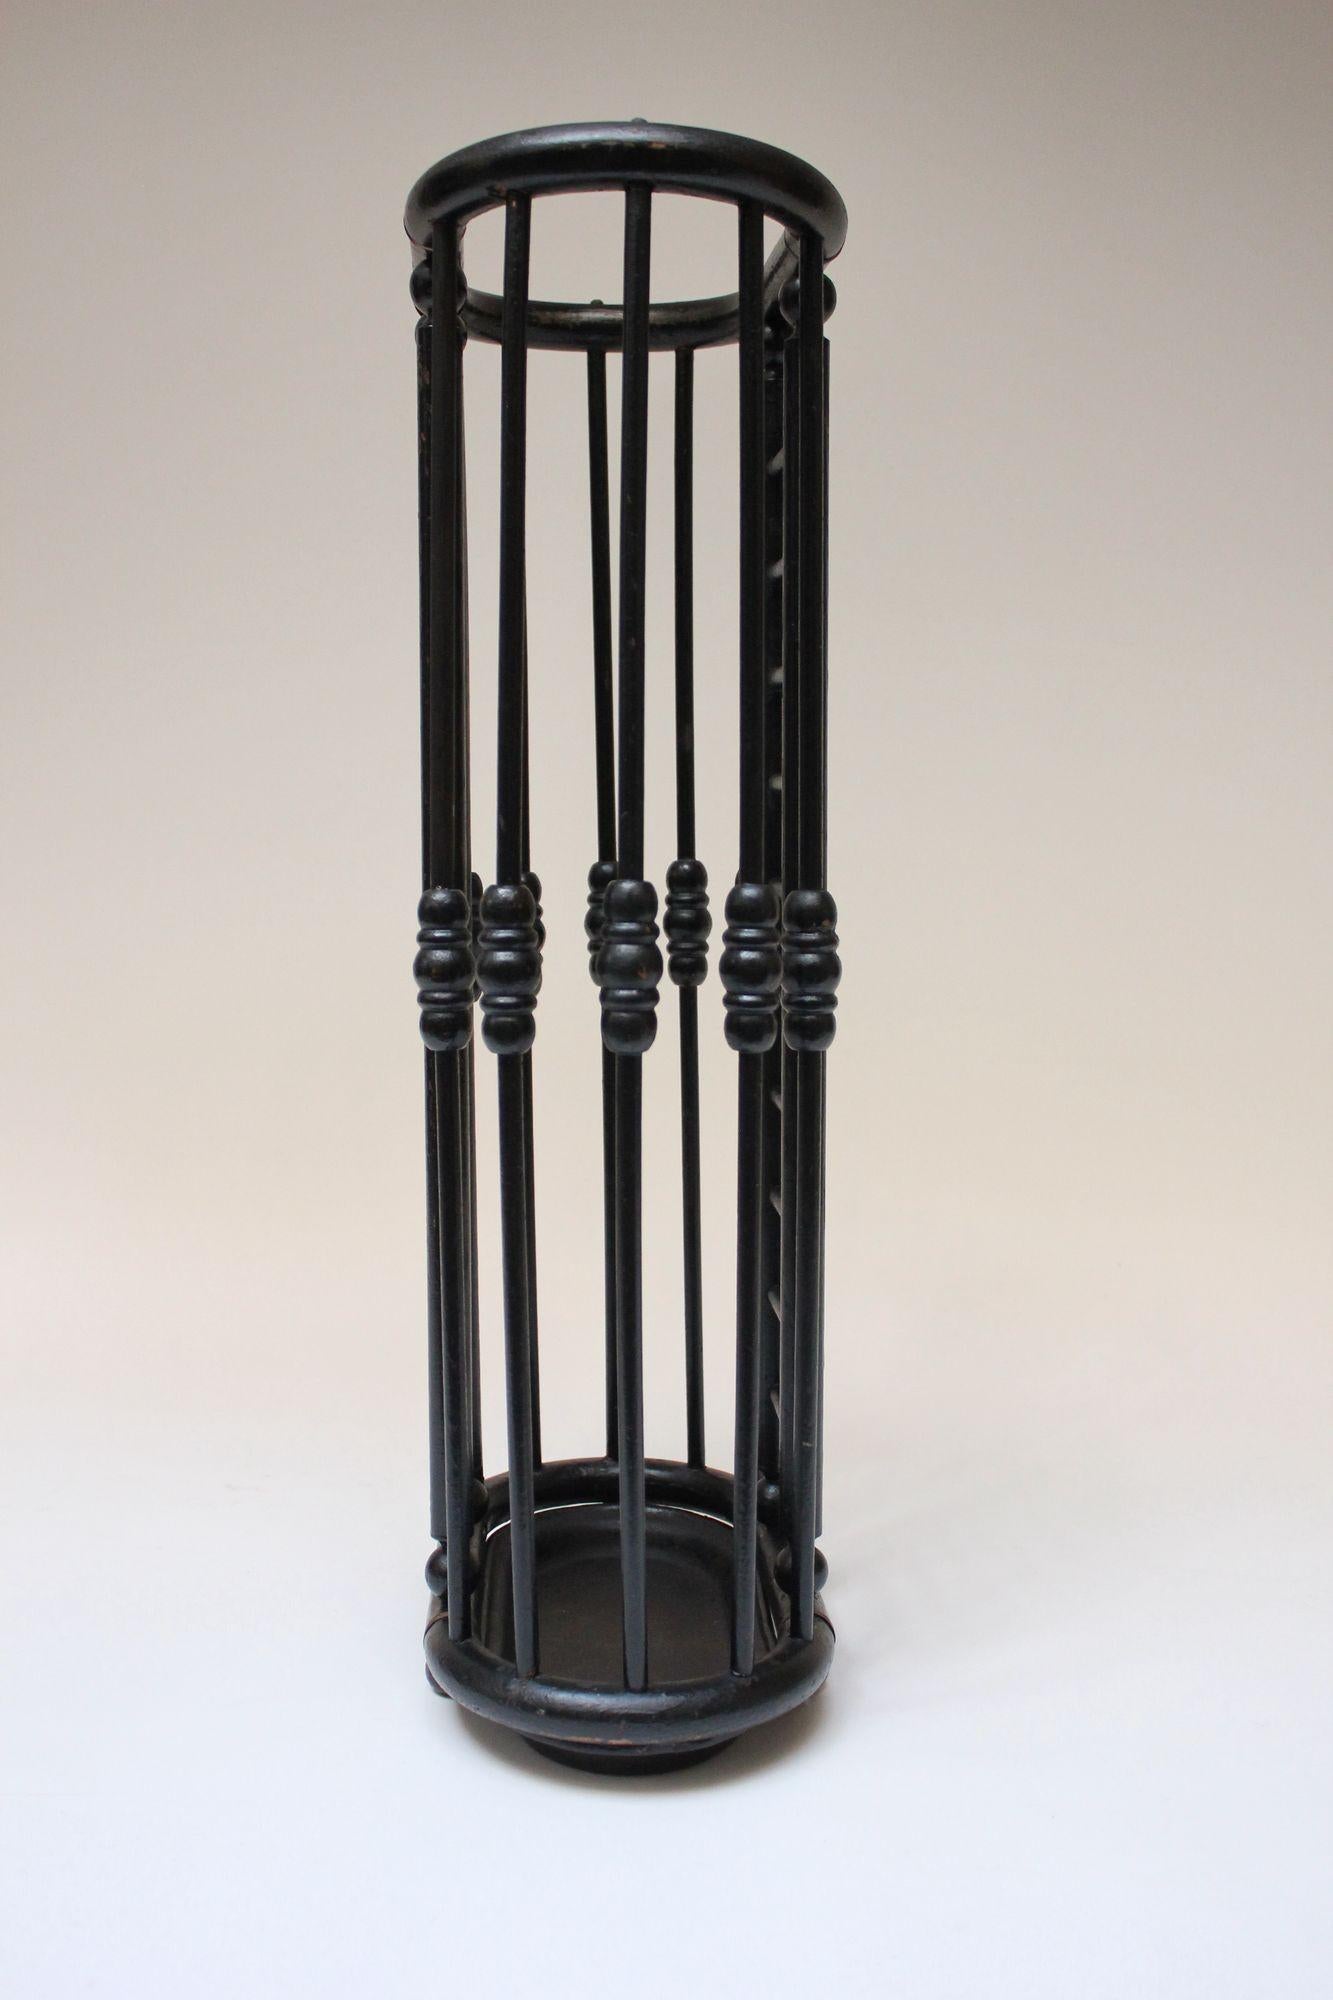 Umbrella stand composed of an ebonized-oak stick and ball constructed frame with painted black cast iron base and brass hardware (ca. late 19th Century/early 20th Century USA).
Some of the spindles are slightly bowed on one side, and there is light